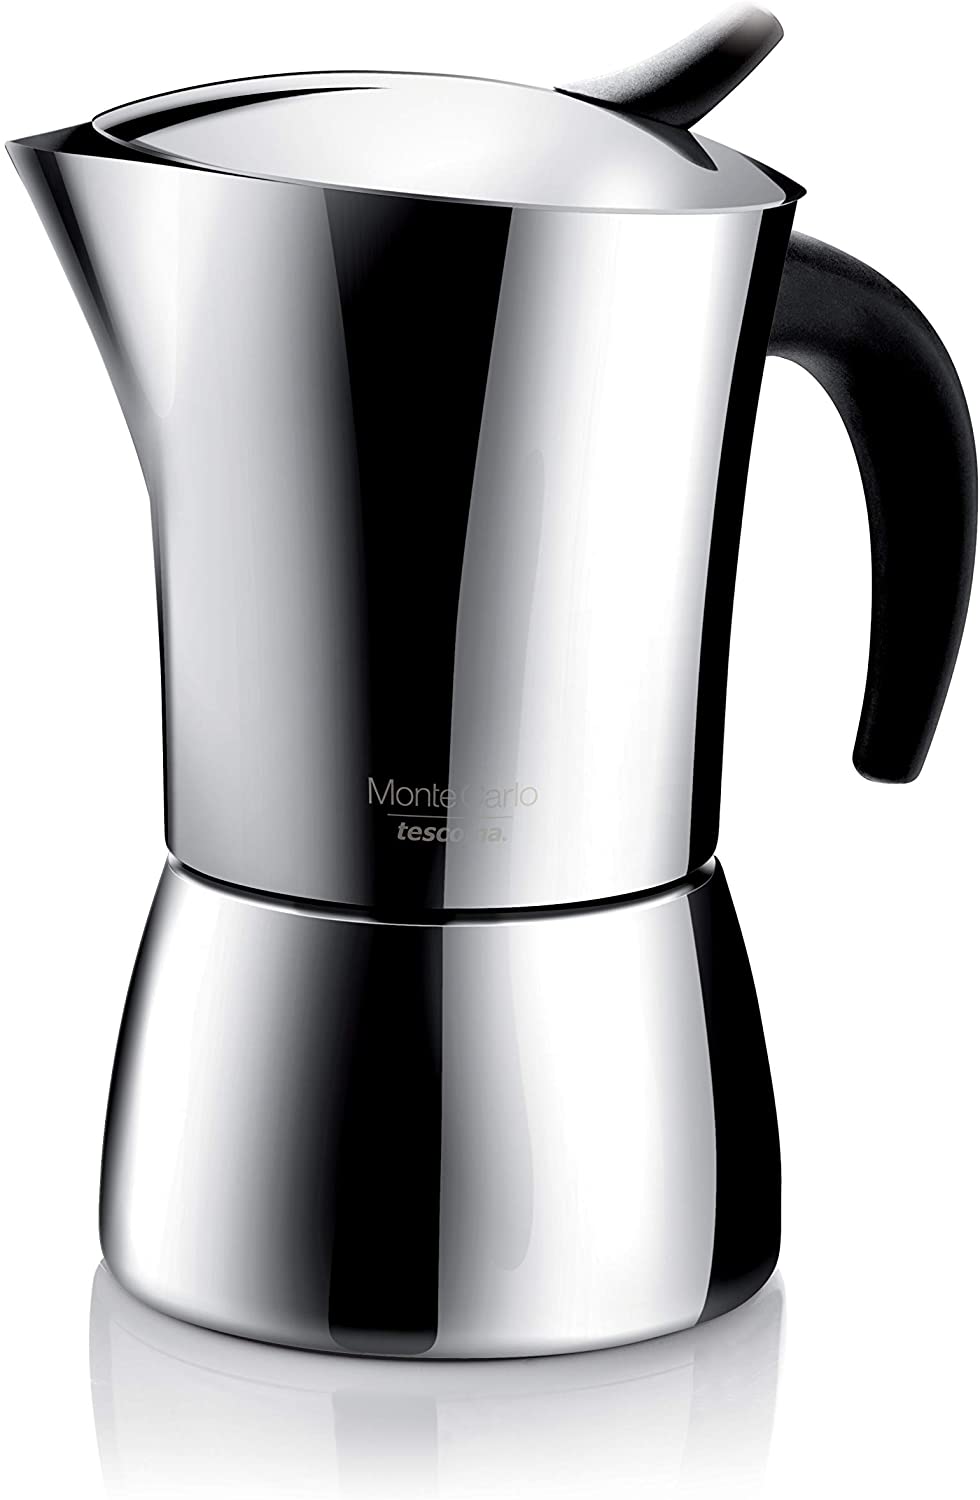 Tescoma Monte Carlo Coffee Maker for 6 Cups